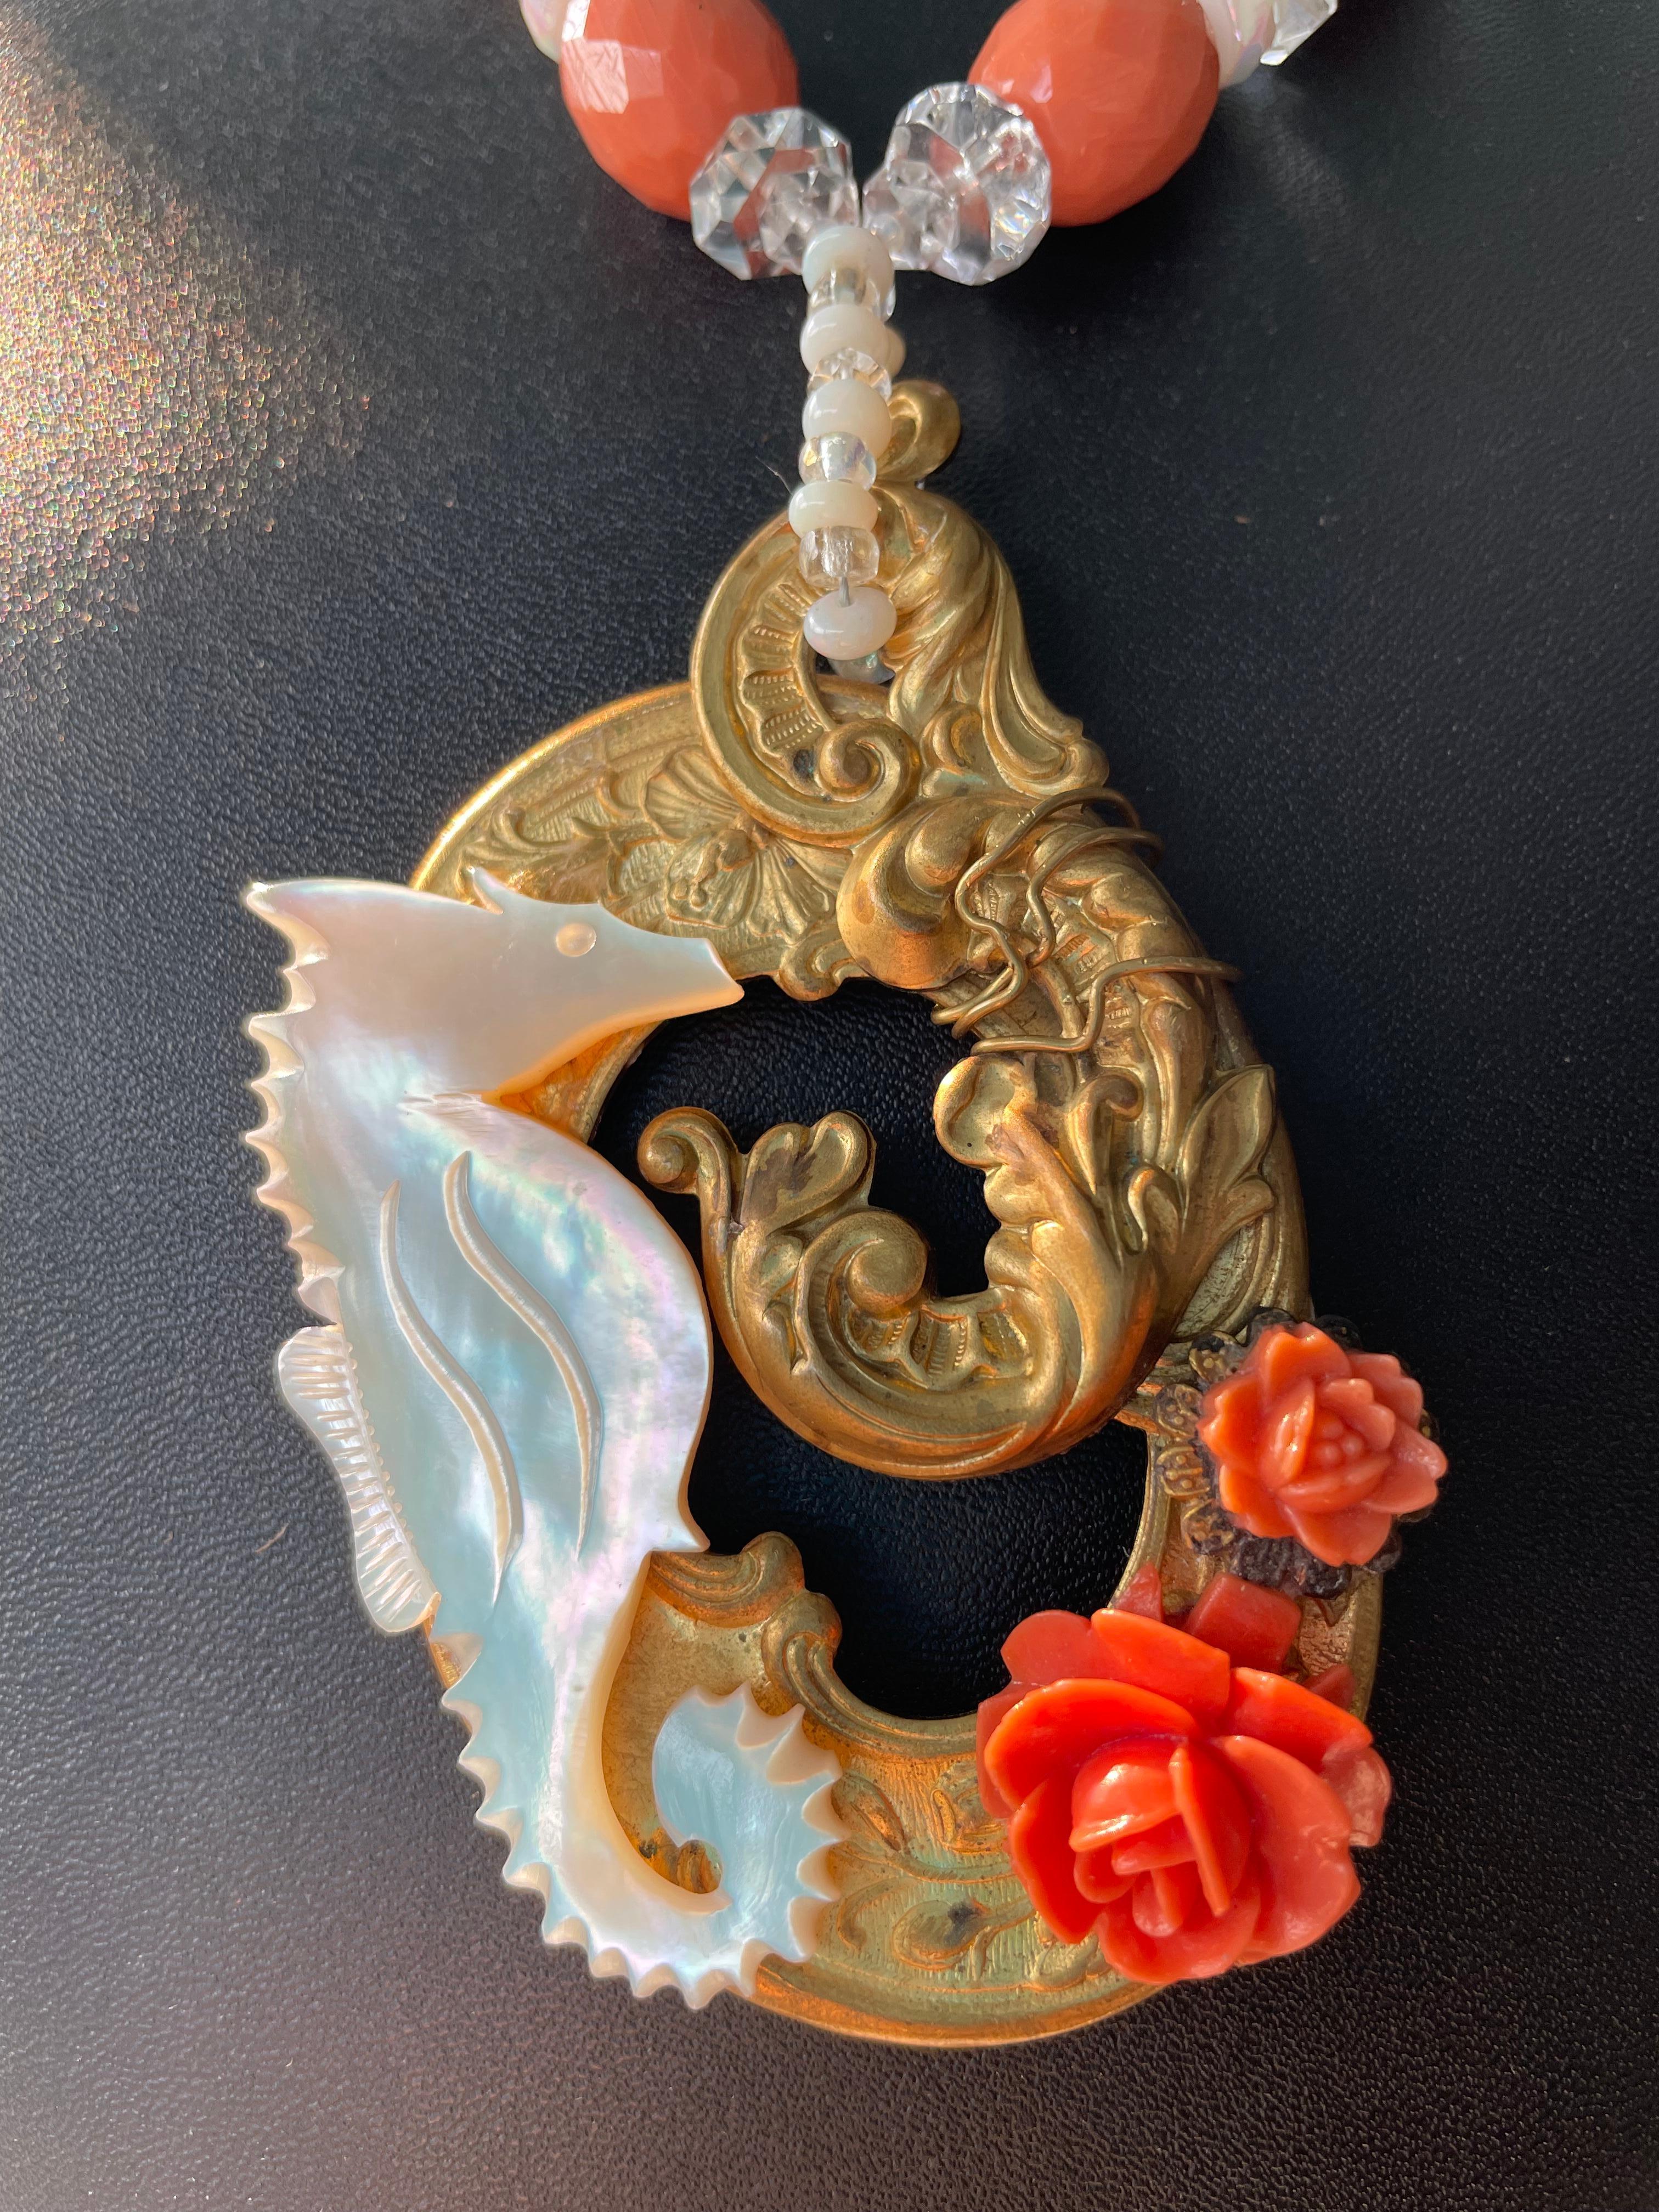 LB original handmade design necklace with multi vintage elements comprising the highly unusual pendant. A vintage brass Rococo style buckle has been embellished with Bakelite roses and a hand carved Mother of Pearl seahorse. Vintage clear and milky